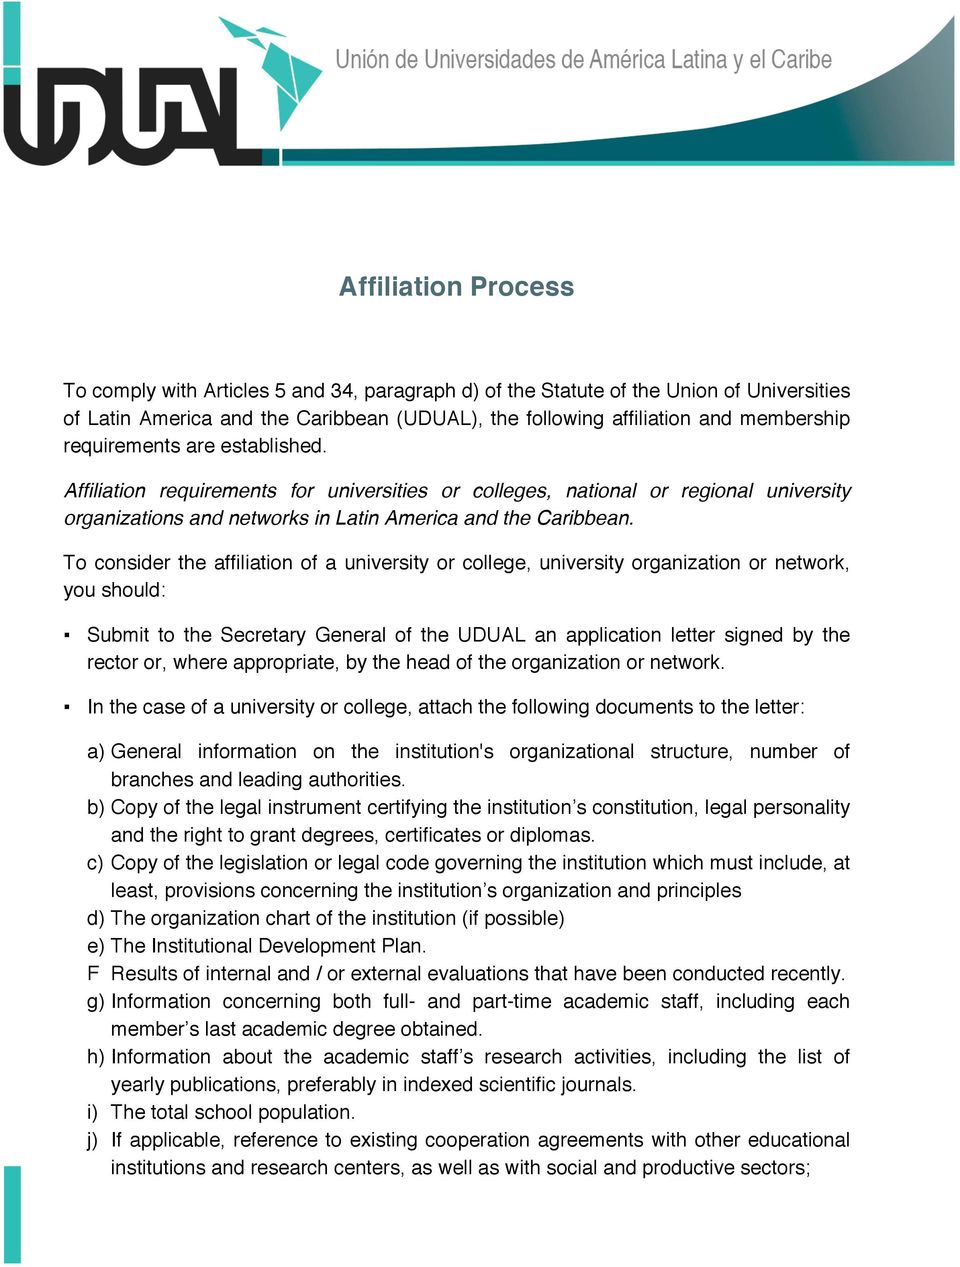 To consider the affiliation of a university or college, university organization or network, you should: Submit to the Secretary General of the UDUAL an application letter signed by the rector or,